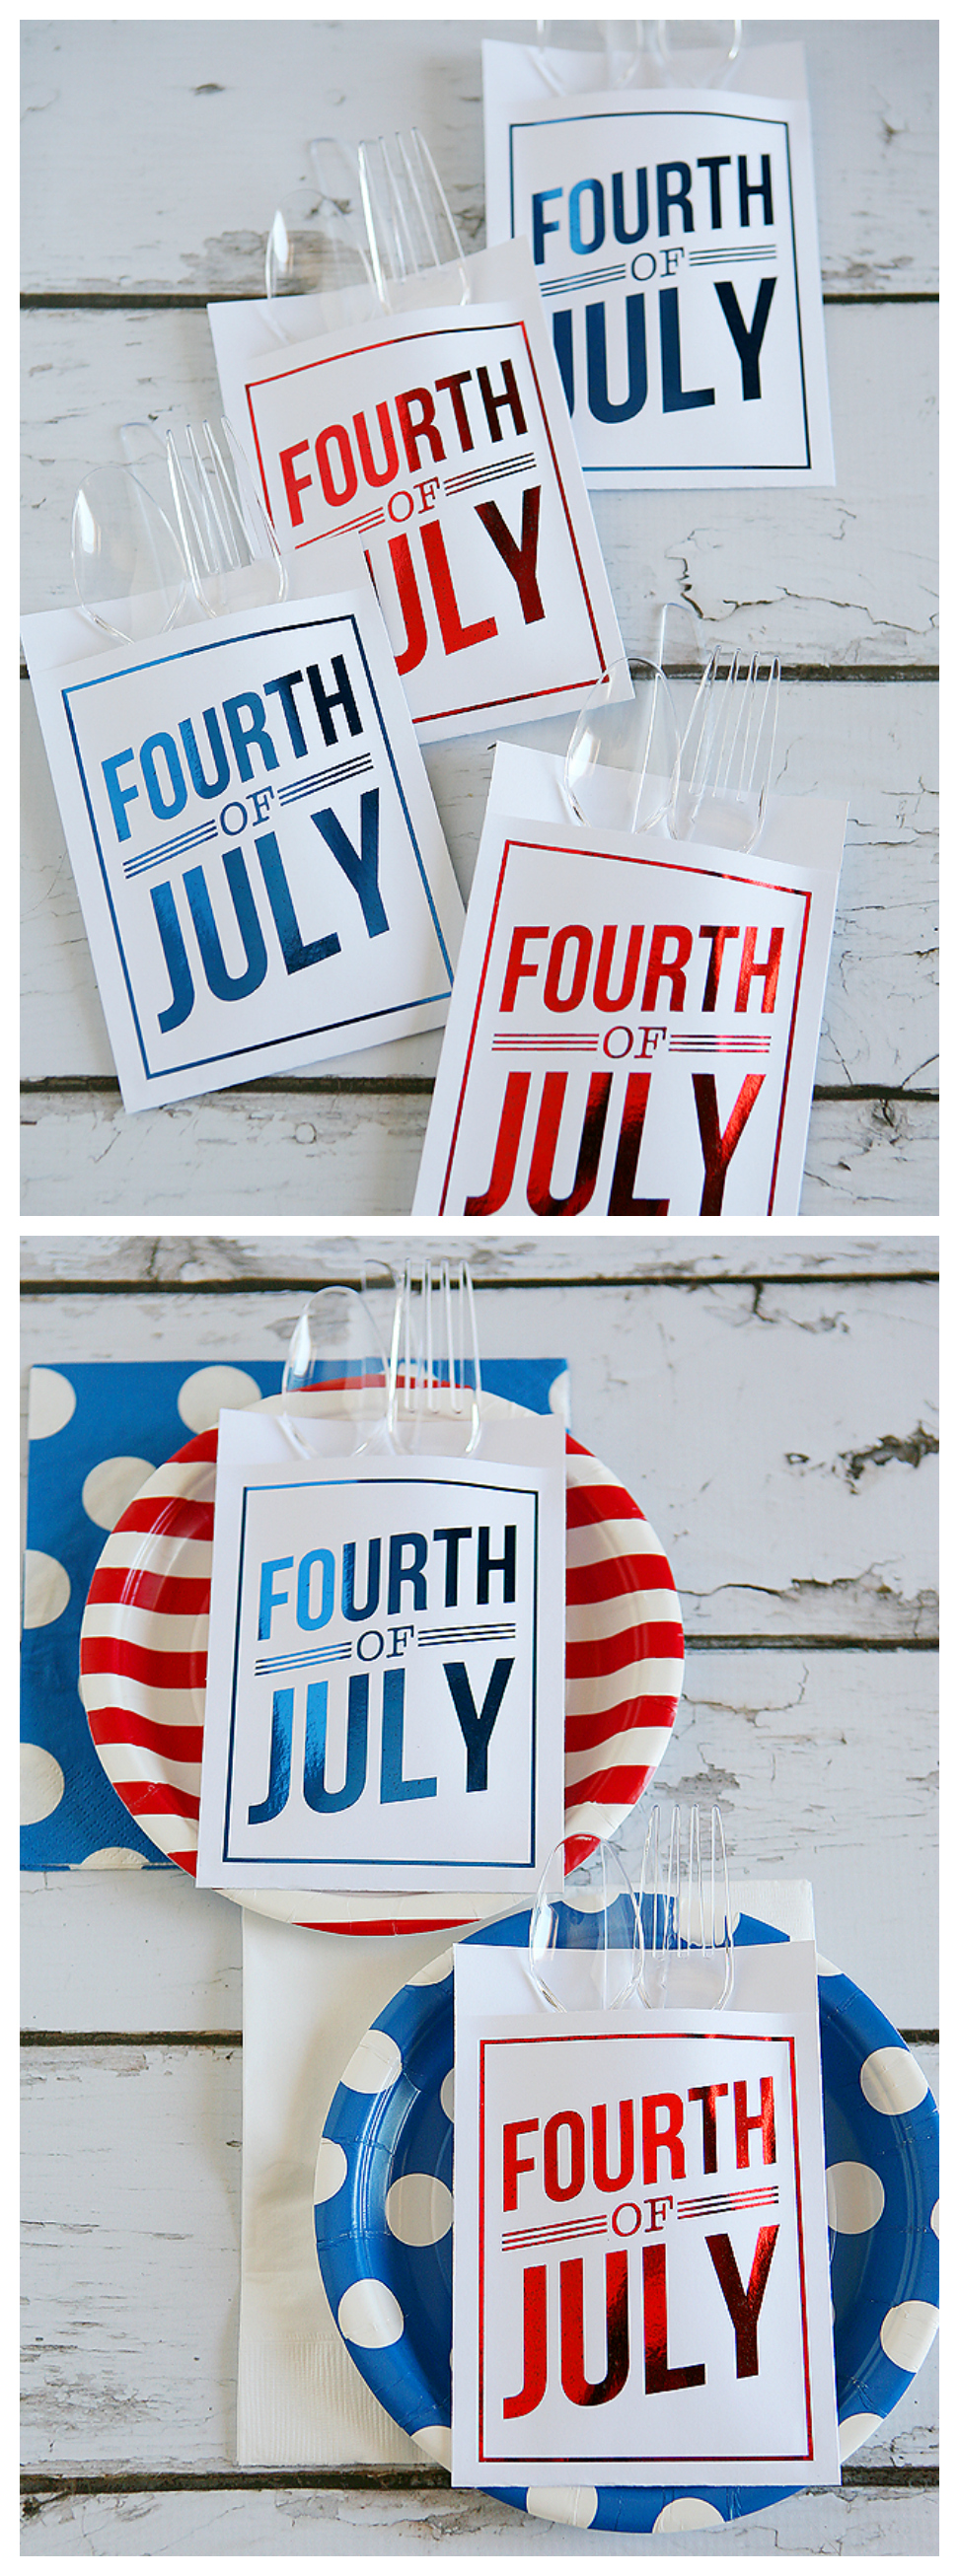 4th of July Utensil Holders | Free Printable 4th of July Utensil Holders for your party!  